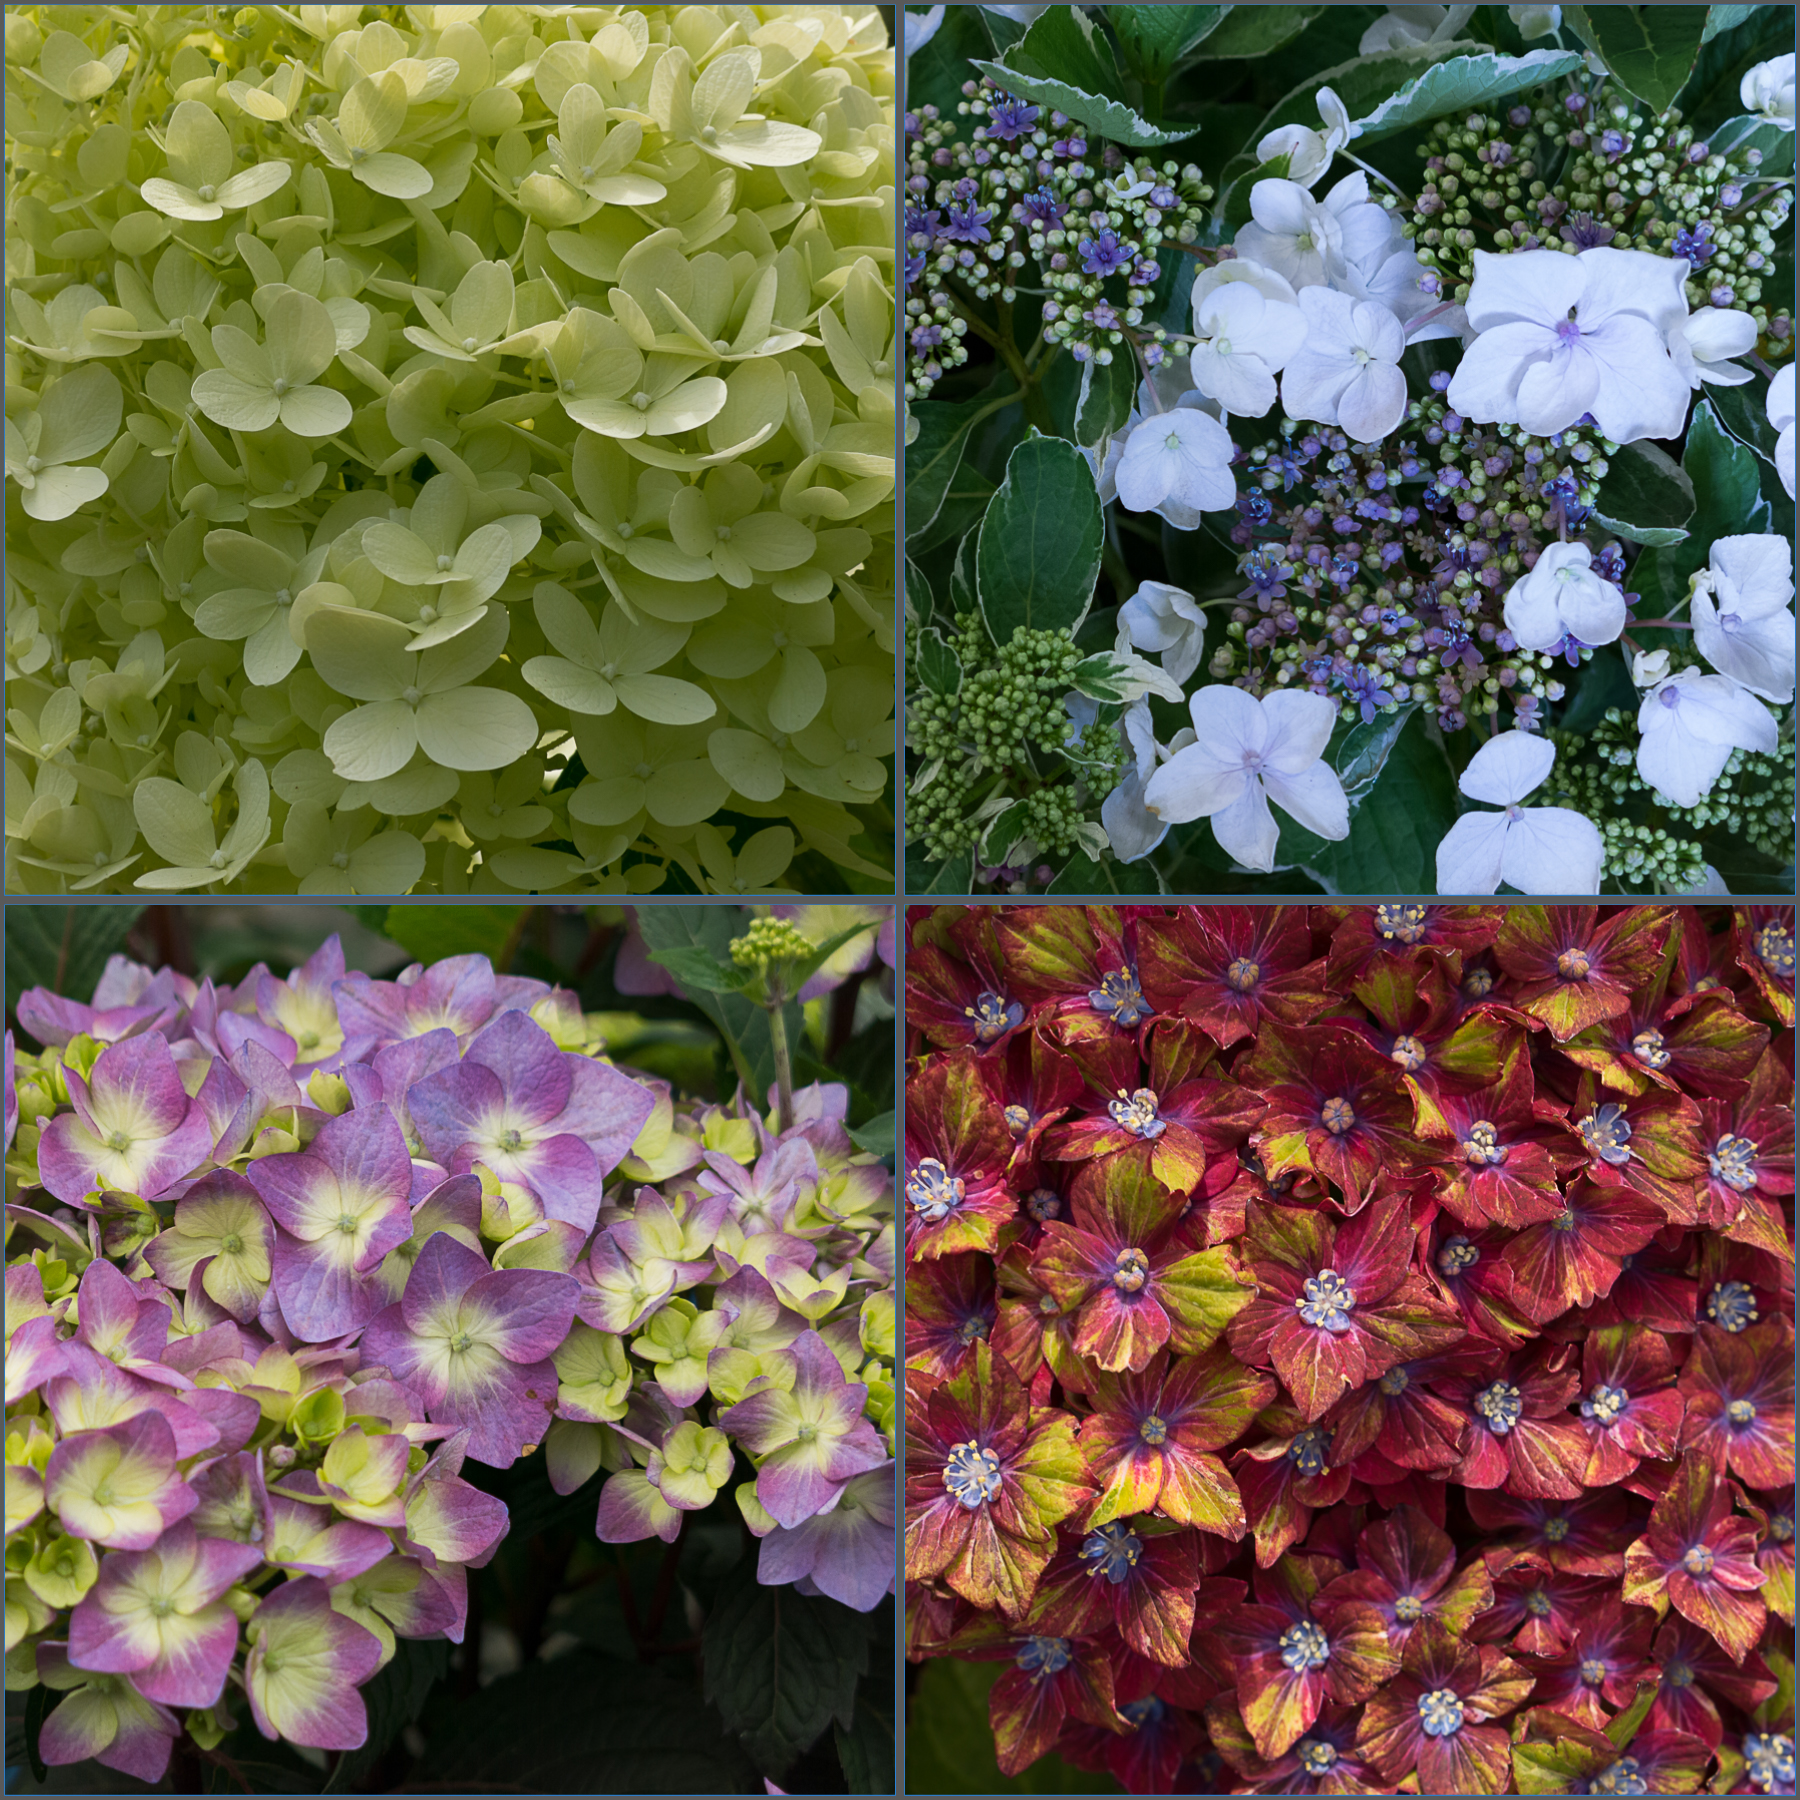 Clockwise from top right; Light o' Day, Pistachio, Bloomstruck, Limelight